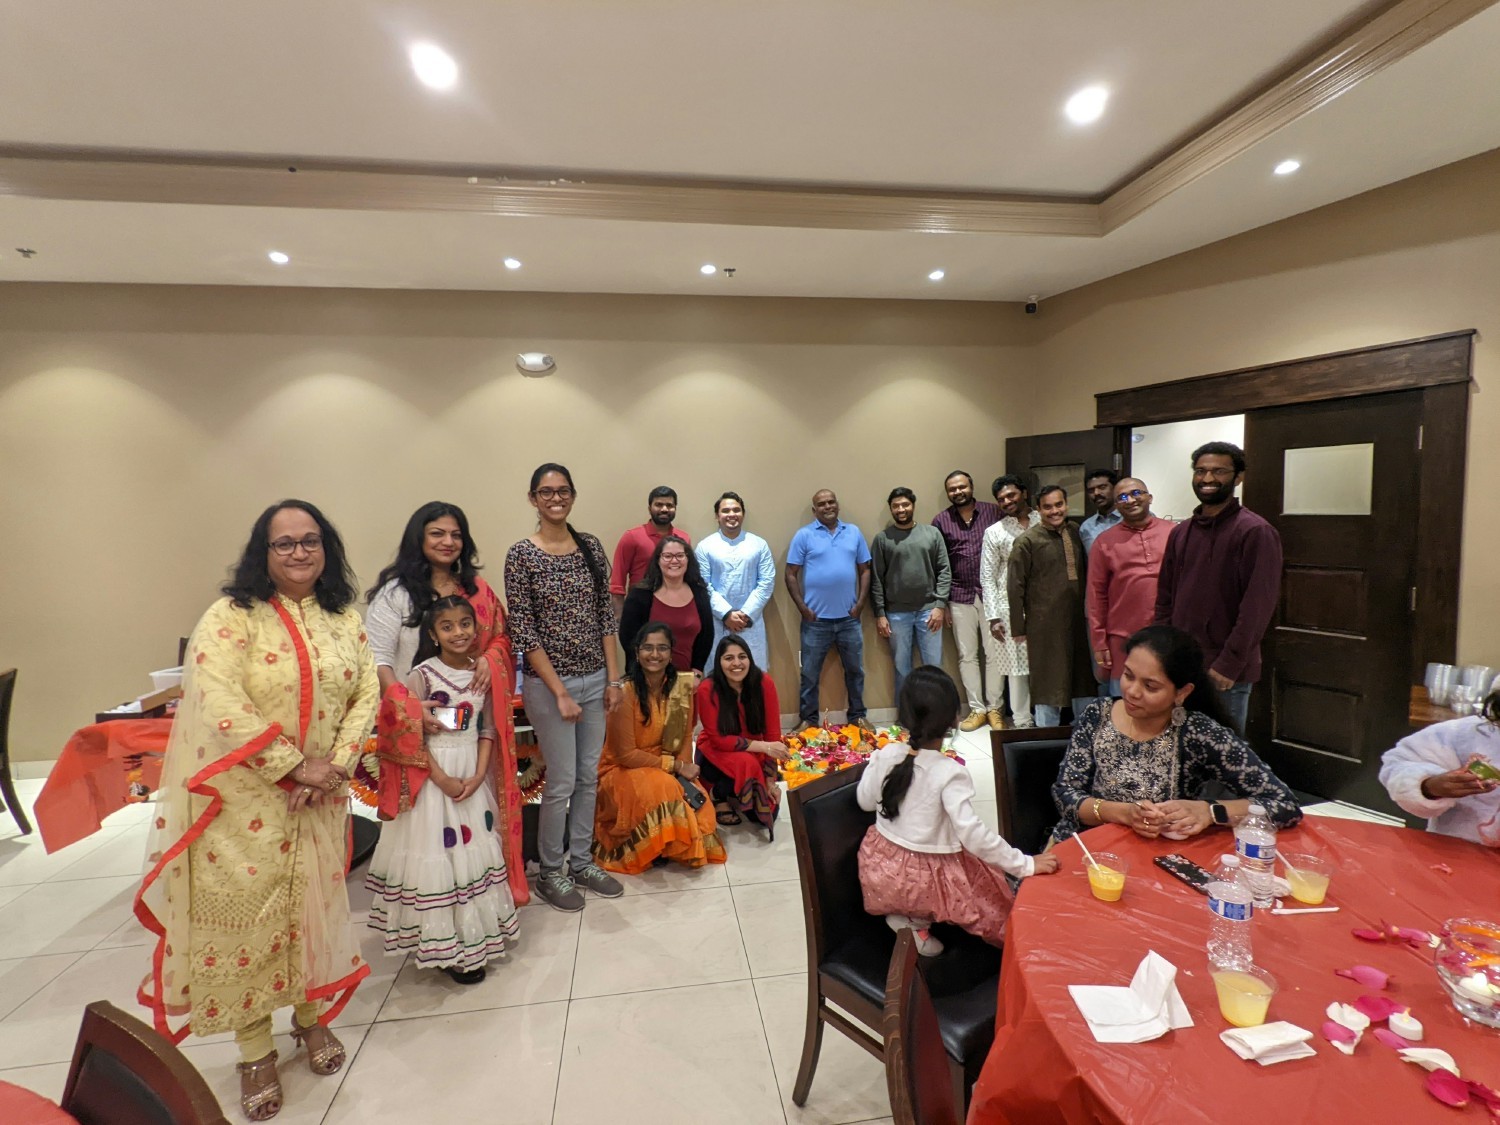 Altimetrians and their families enjoying an evening of food, fun and culture.